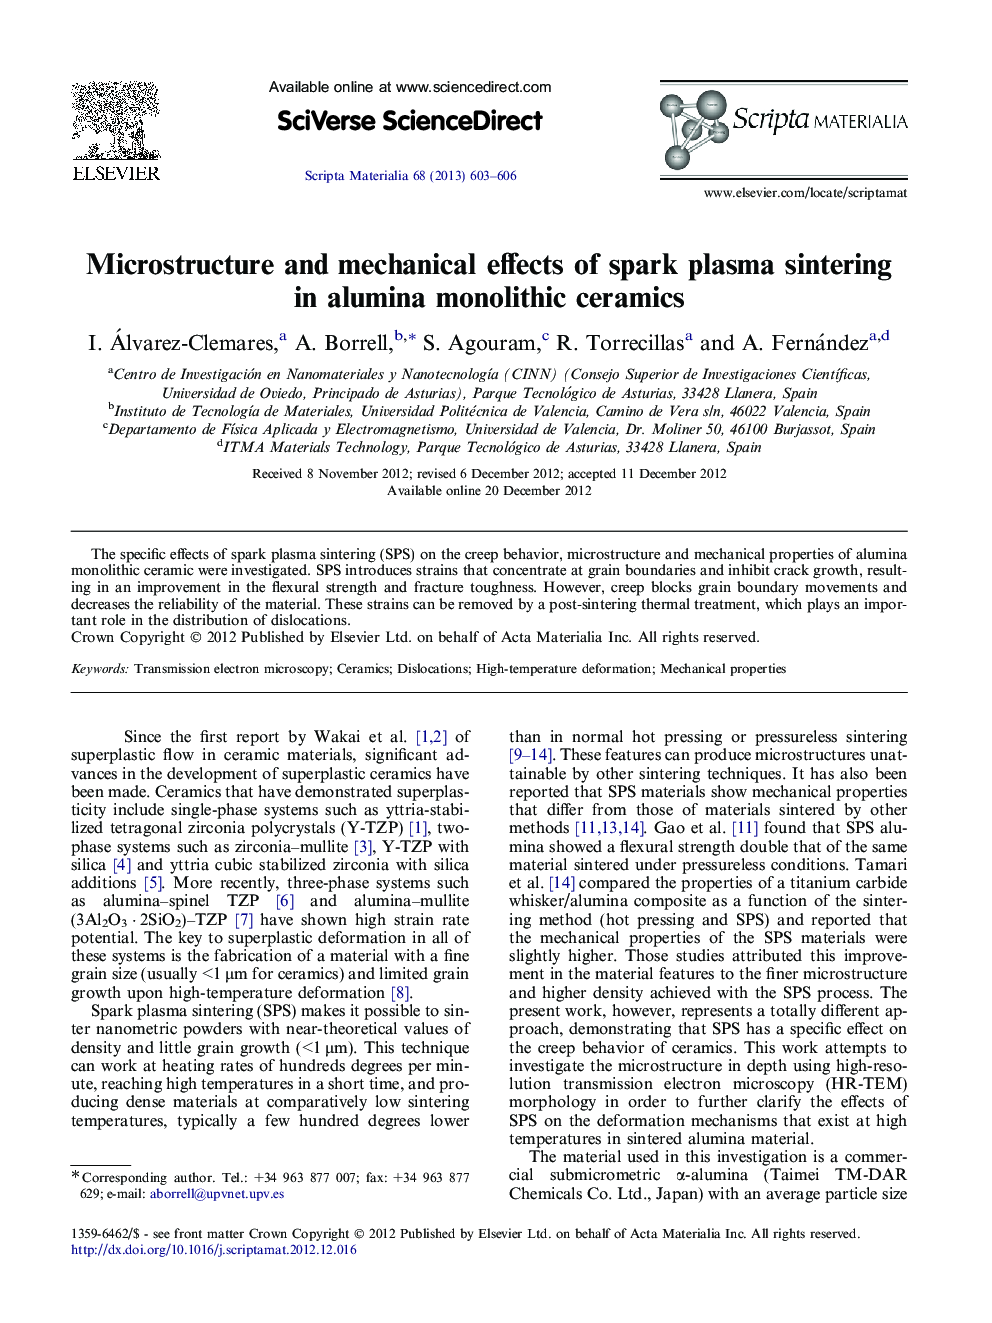 Microstructure and mechanical effects of spark plasma sintering in alumina monolithic ceramics